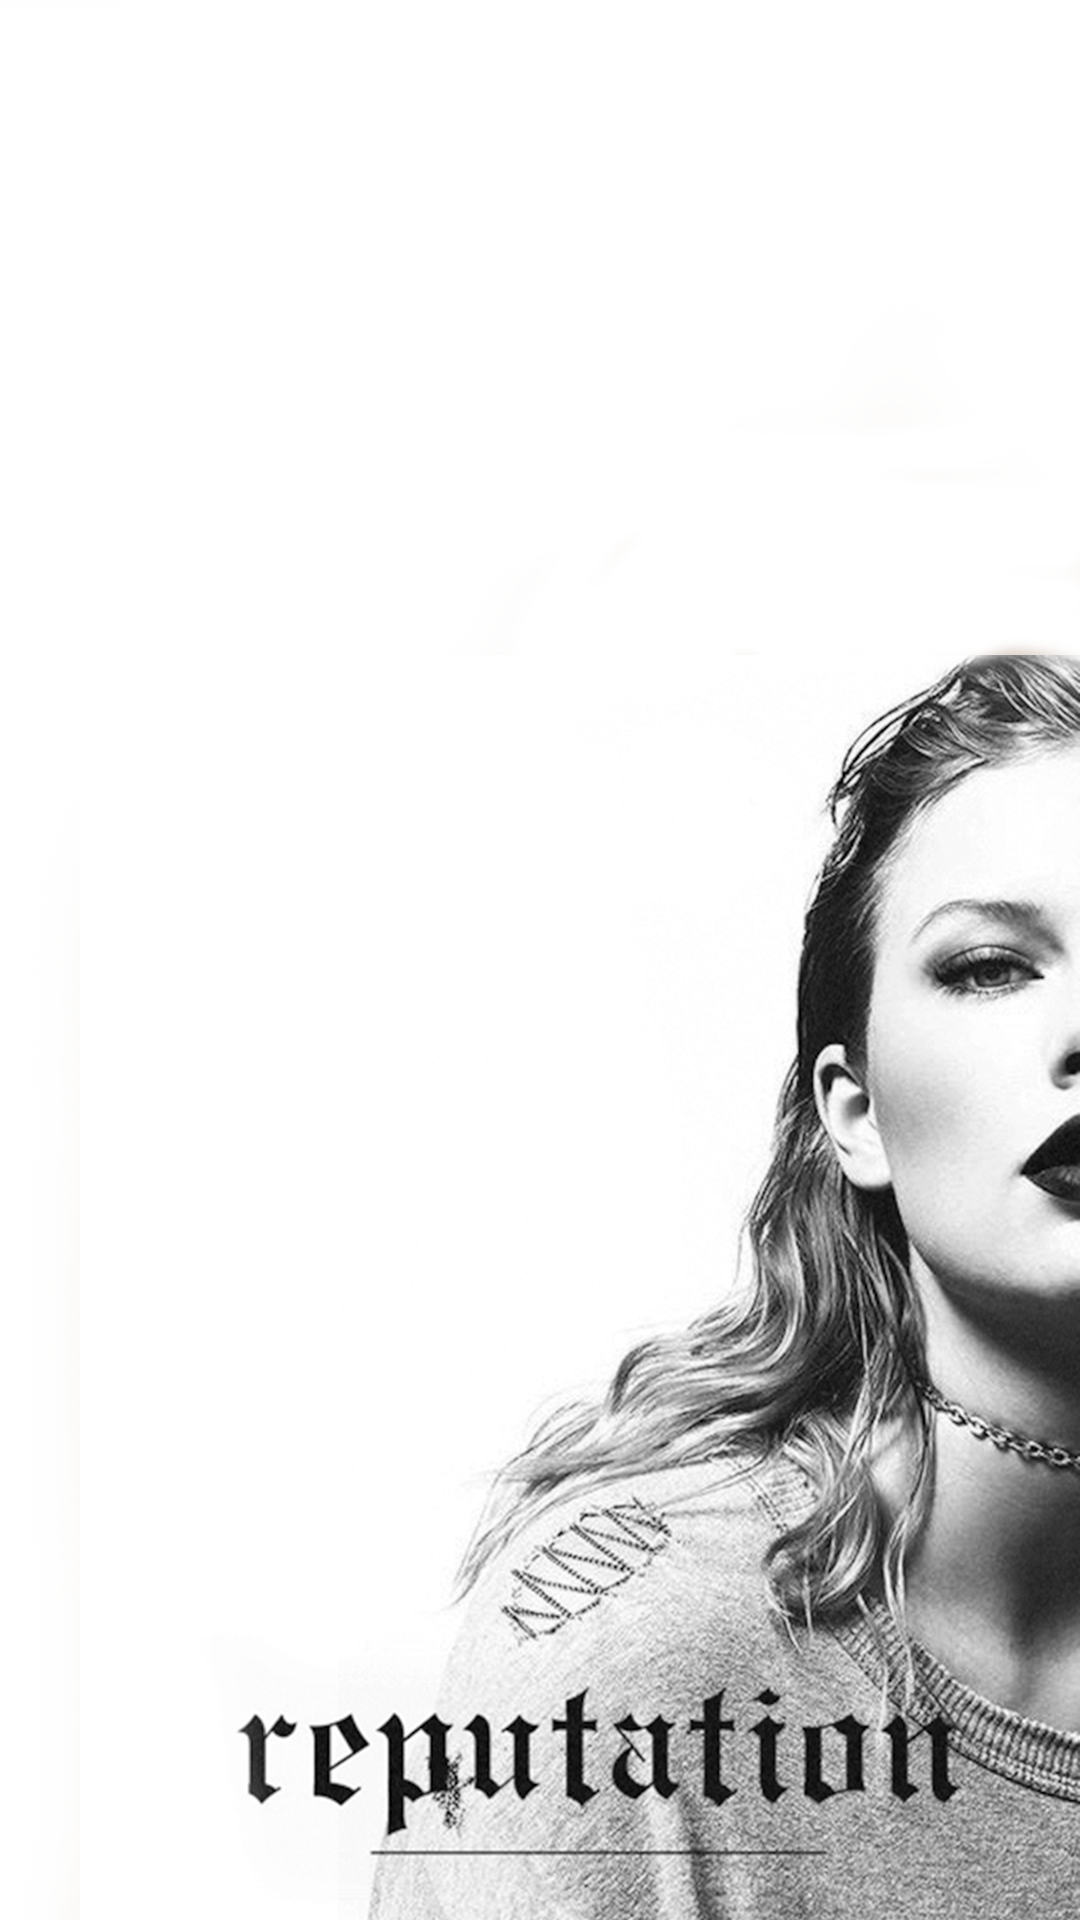 Taylor Swift Reputation Wallpapers Top Free Taylor Swift Reputation Backgrounds Wallpaperaccess